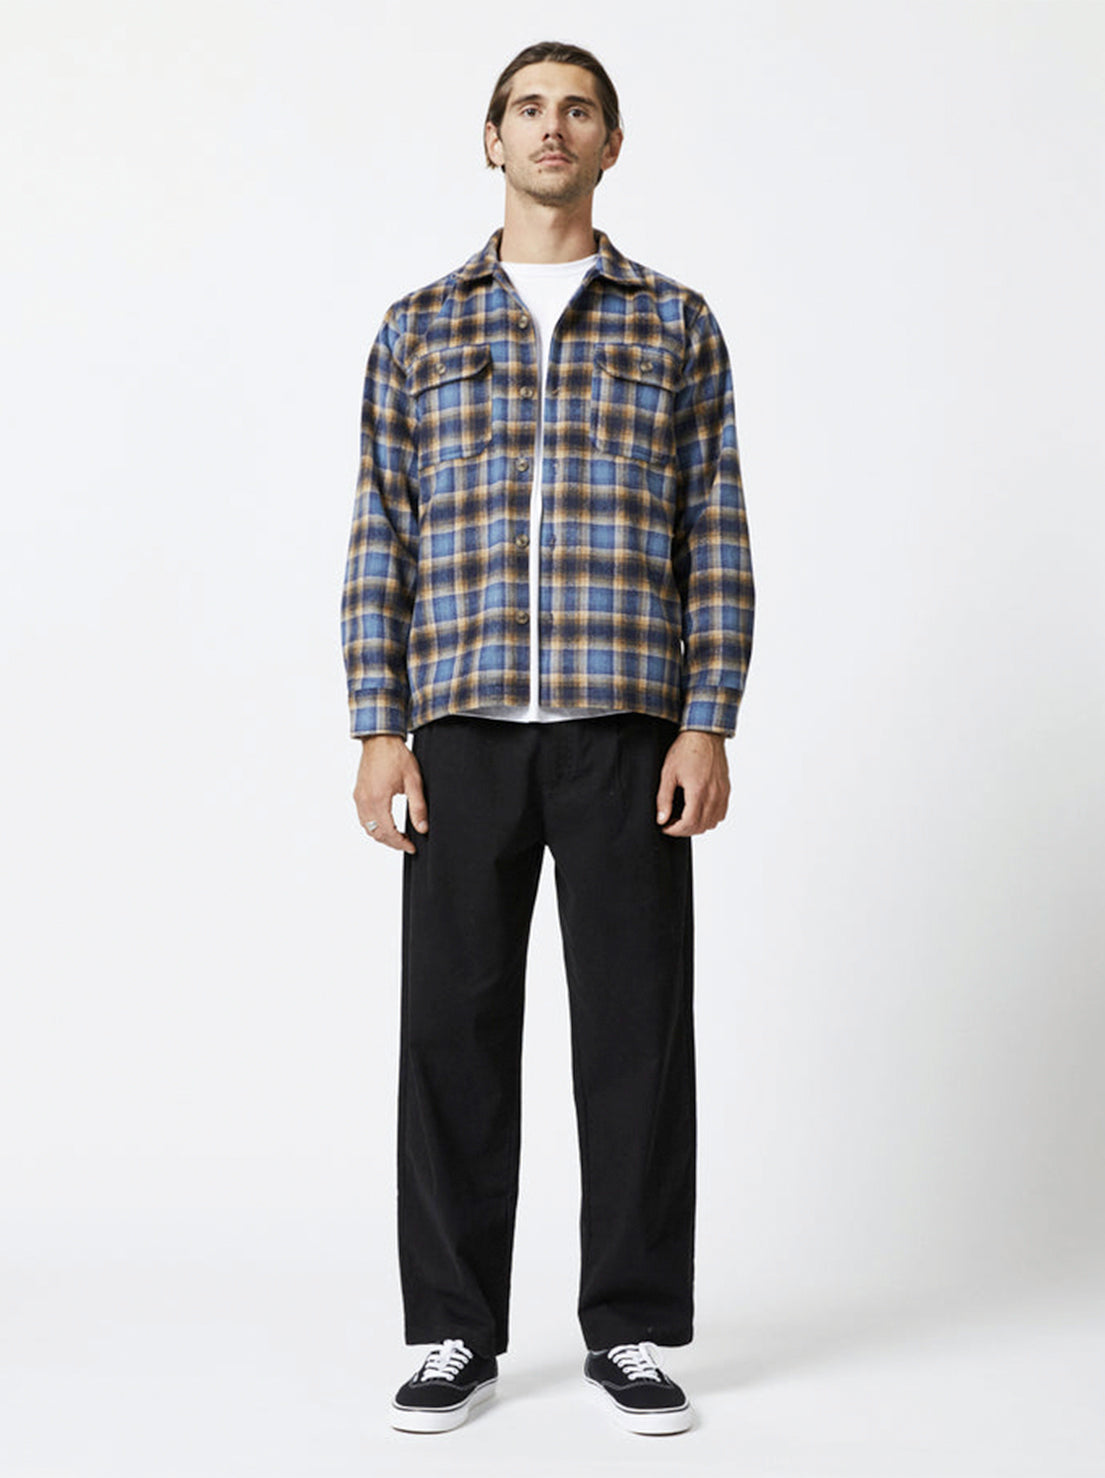 Mr Simple - Nomad Heavy LS Flannel - Blue/Brown